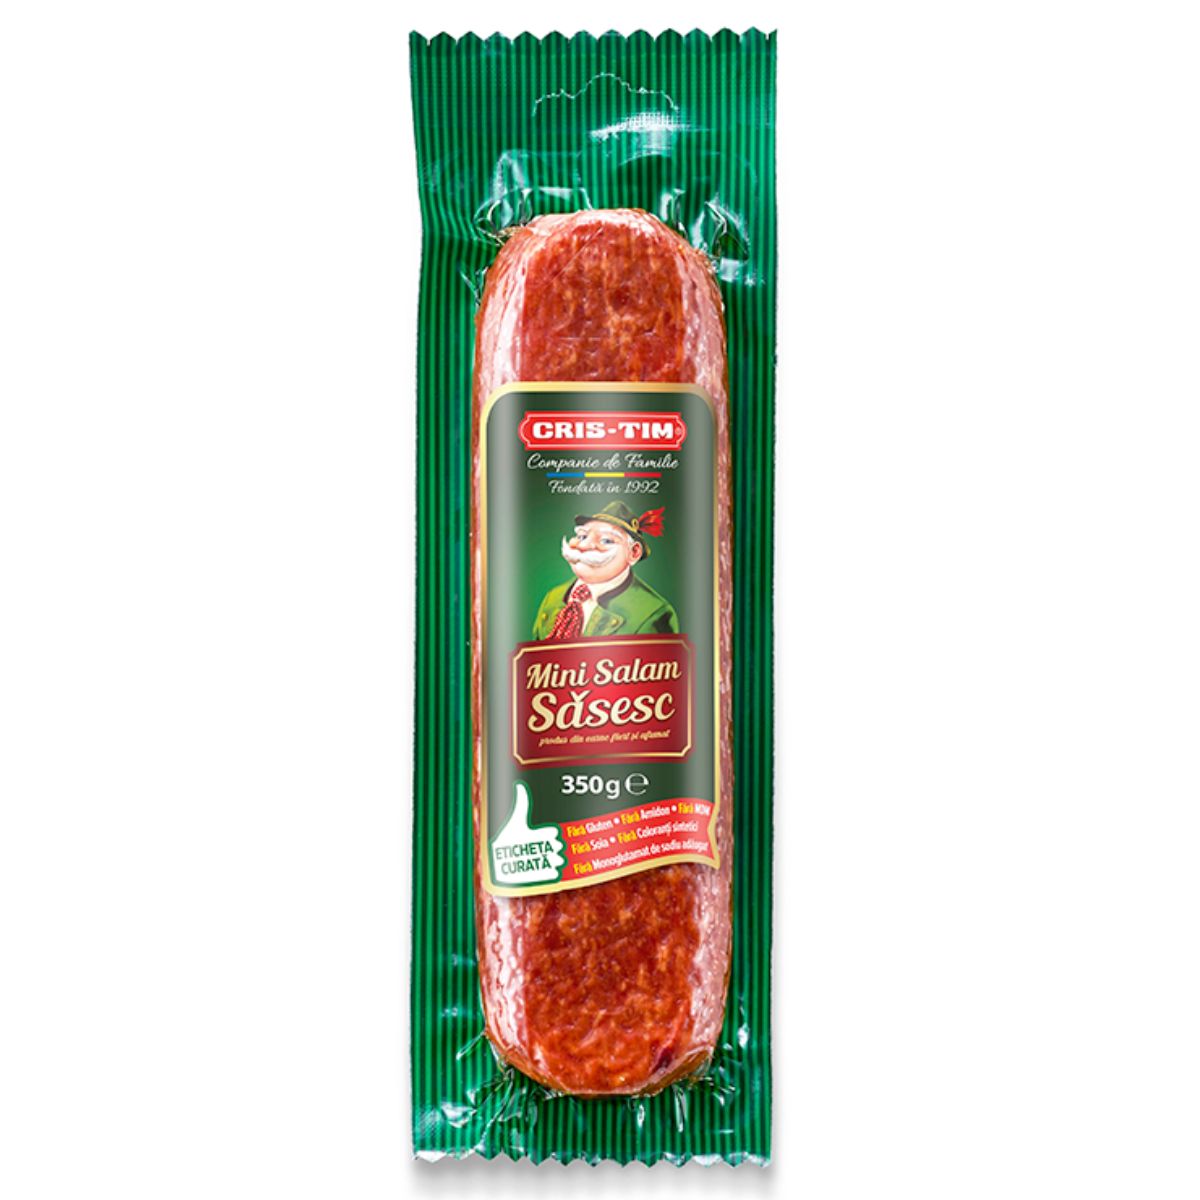 A Sokolow - Sasesc Salami in a package on a white background.